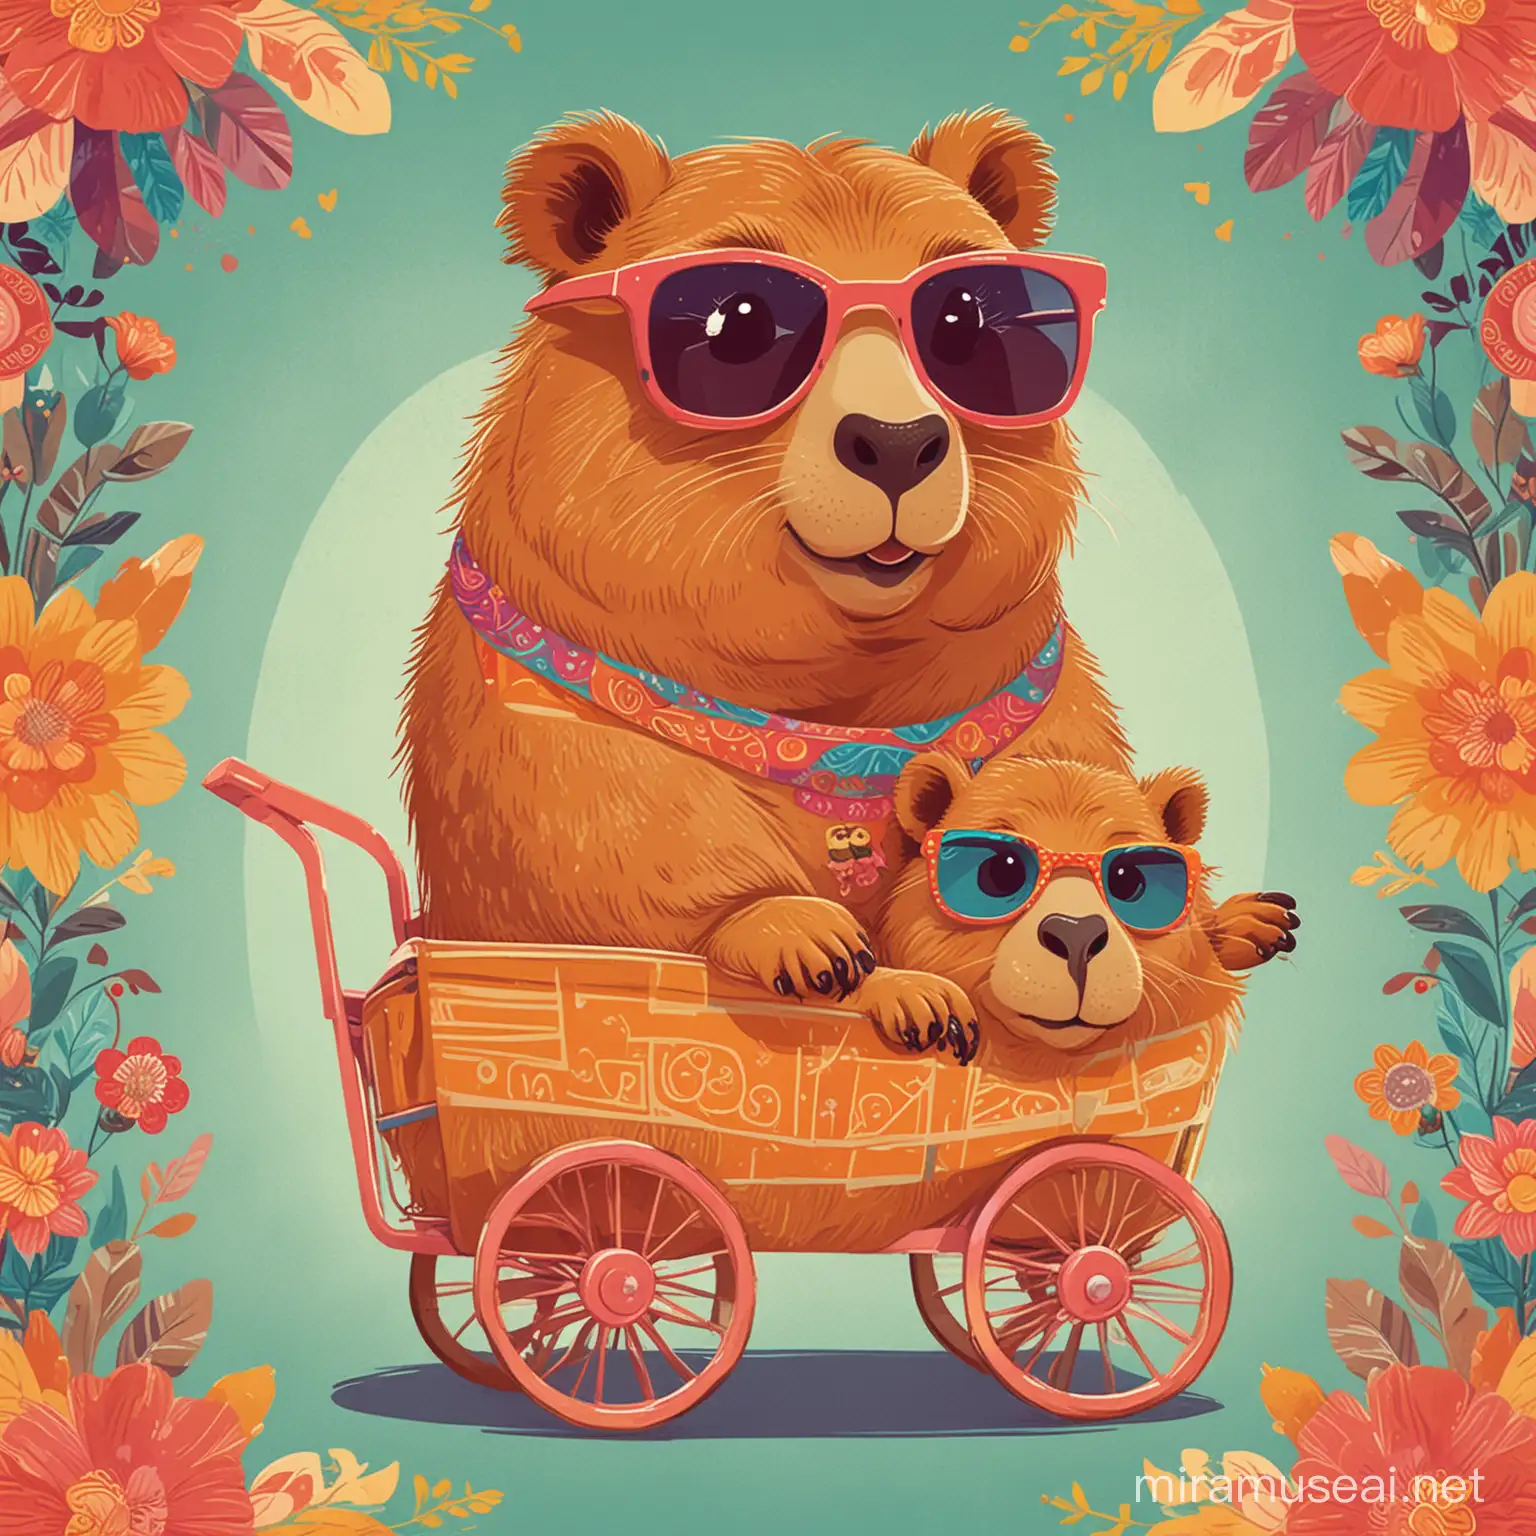 A delightful retro-inspired vector illustration featuring a loving capybara mommy and her adorable baby. They are both portrayed with a groovy vibe, wearing sunglasses and smiling. The mommy capybara pushes a quirky, colorful cart with the baby sitting inside. The background is a vibrant, patterned design with a sense of nostalgia and fun.